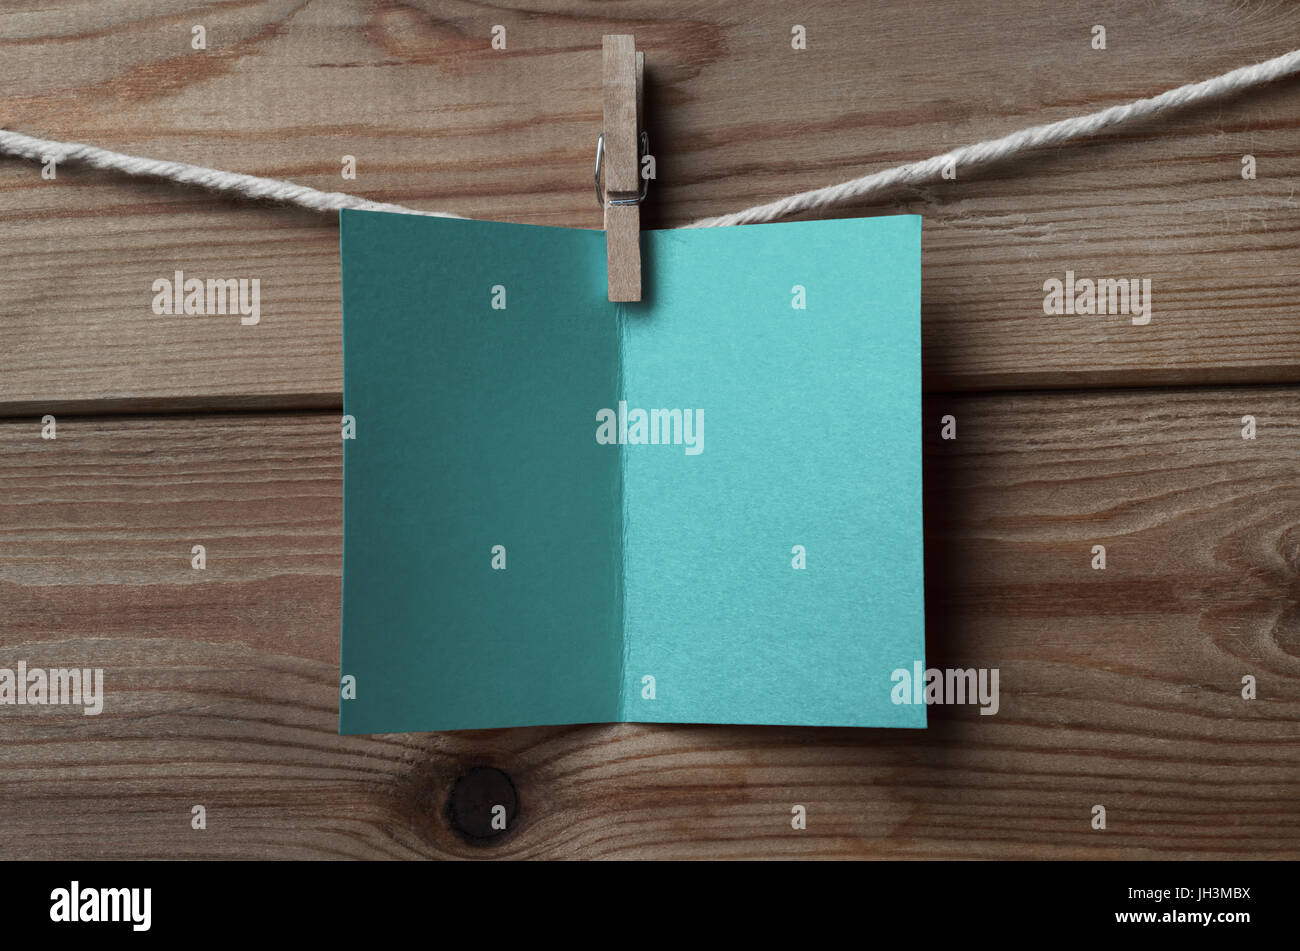 An opened, blank turquoise blue  greeting or Christmas card, pegged on to string against wood plank background Stock Photo